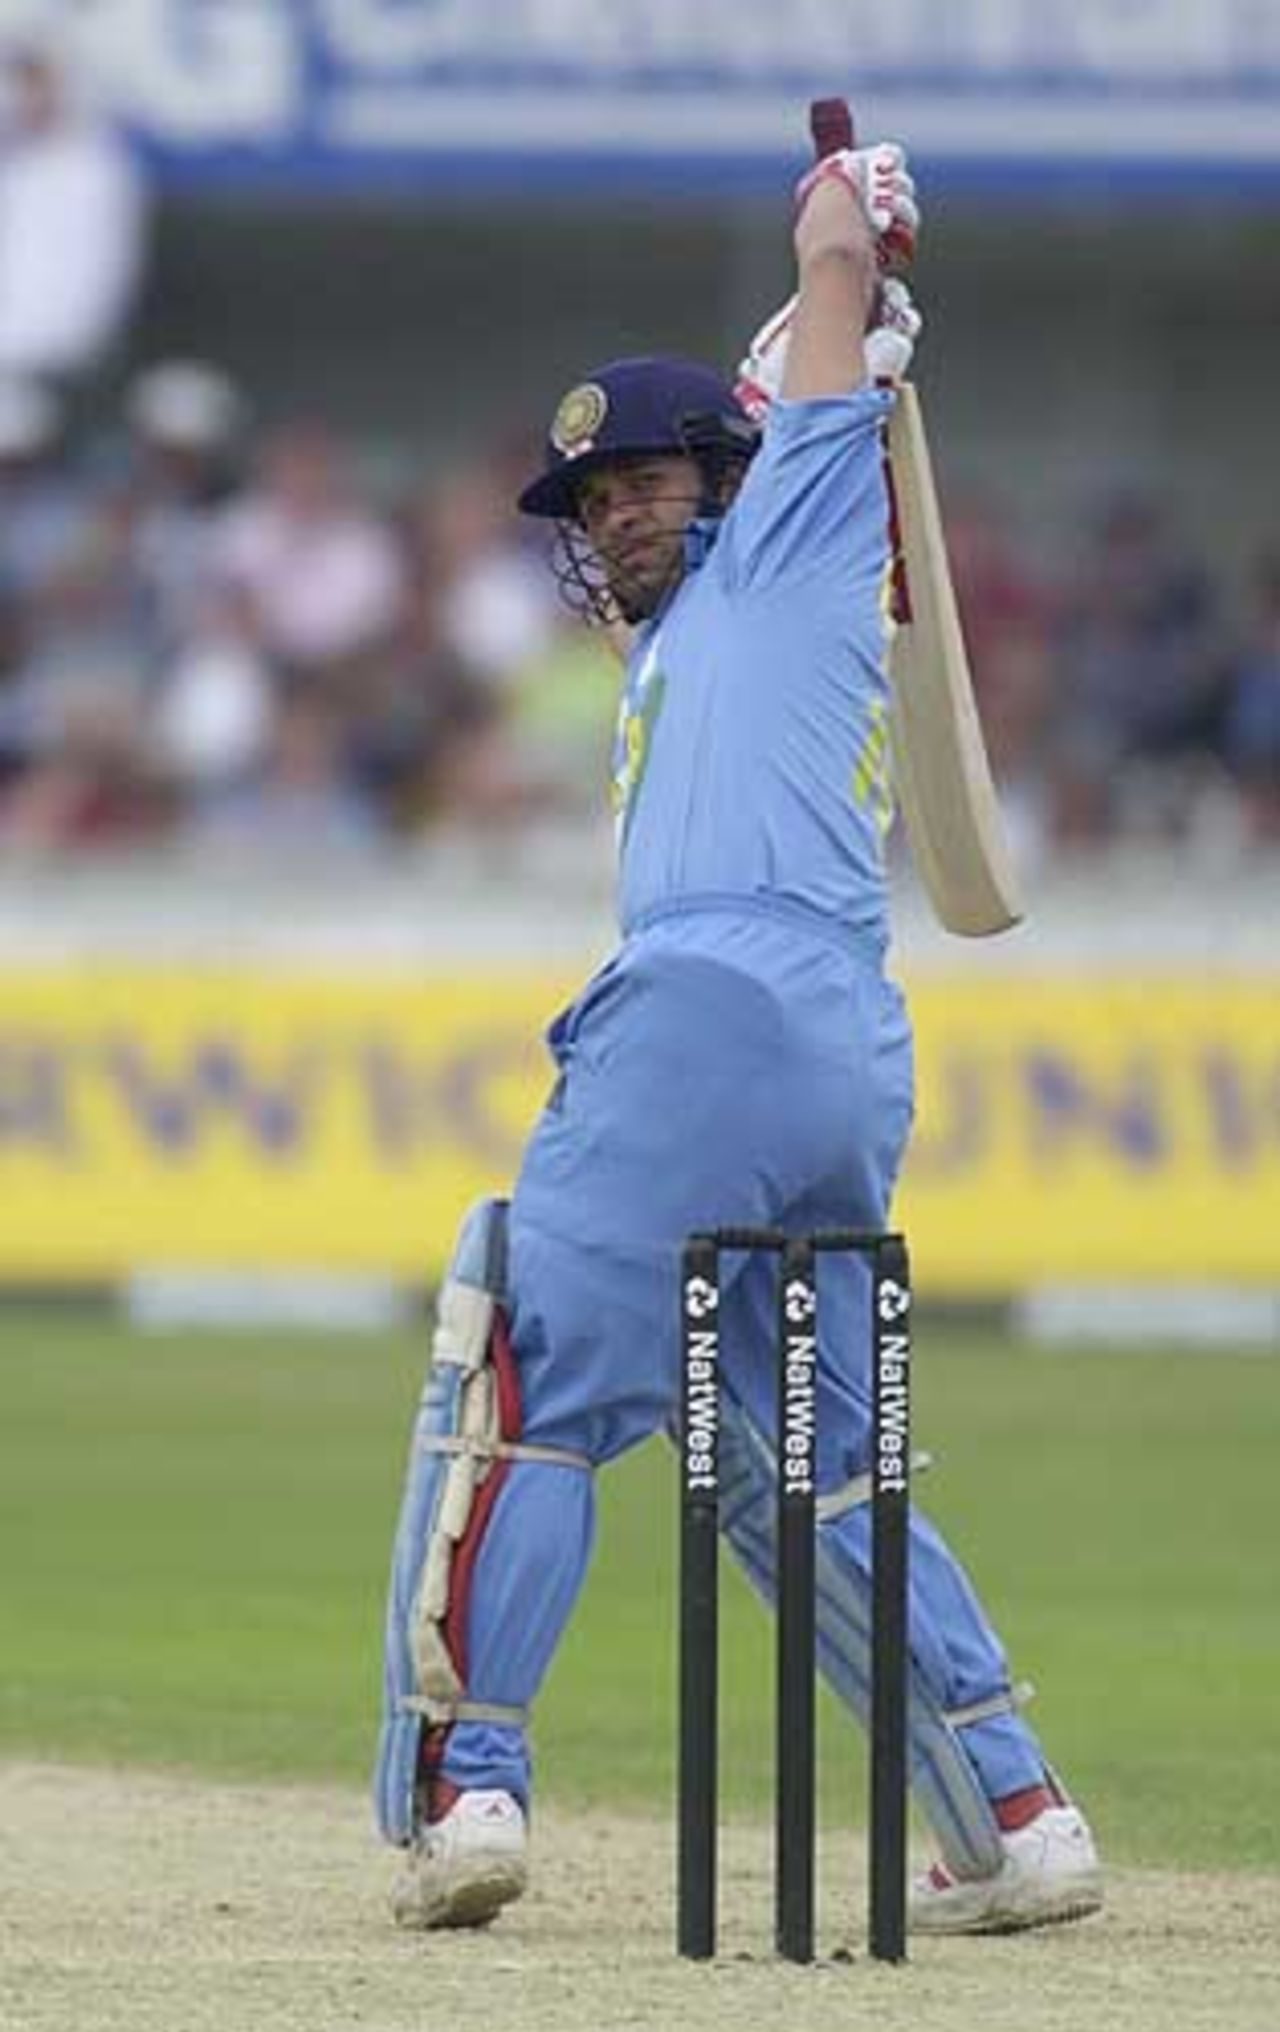 Sachin Tendulkar eases himself out of the line of a lifting delivery from Zoysa, India v Sri Lanka, NatWest Series, The Oval, 30 Jun 2002